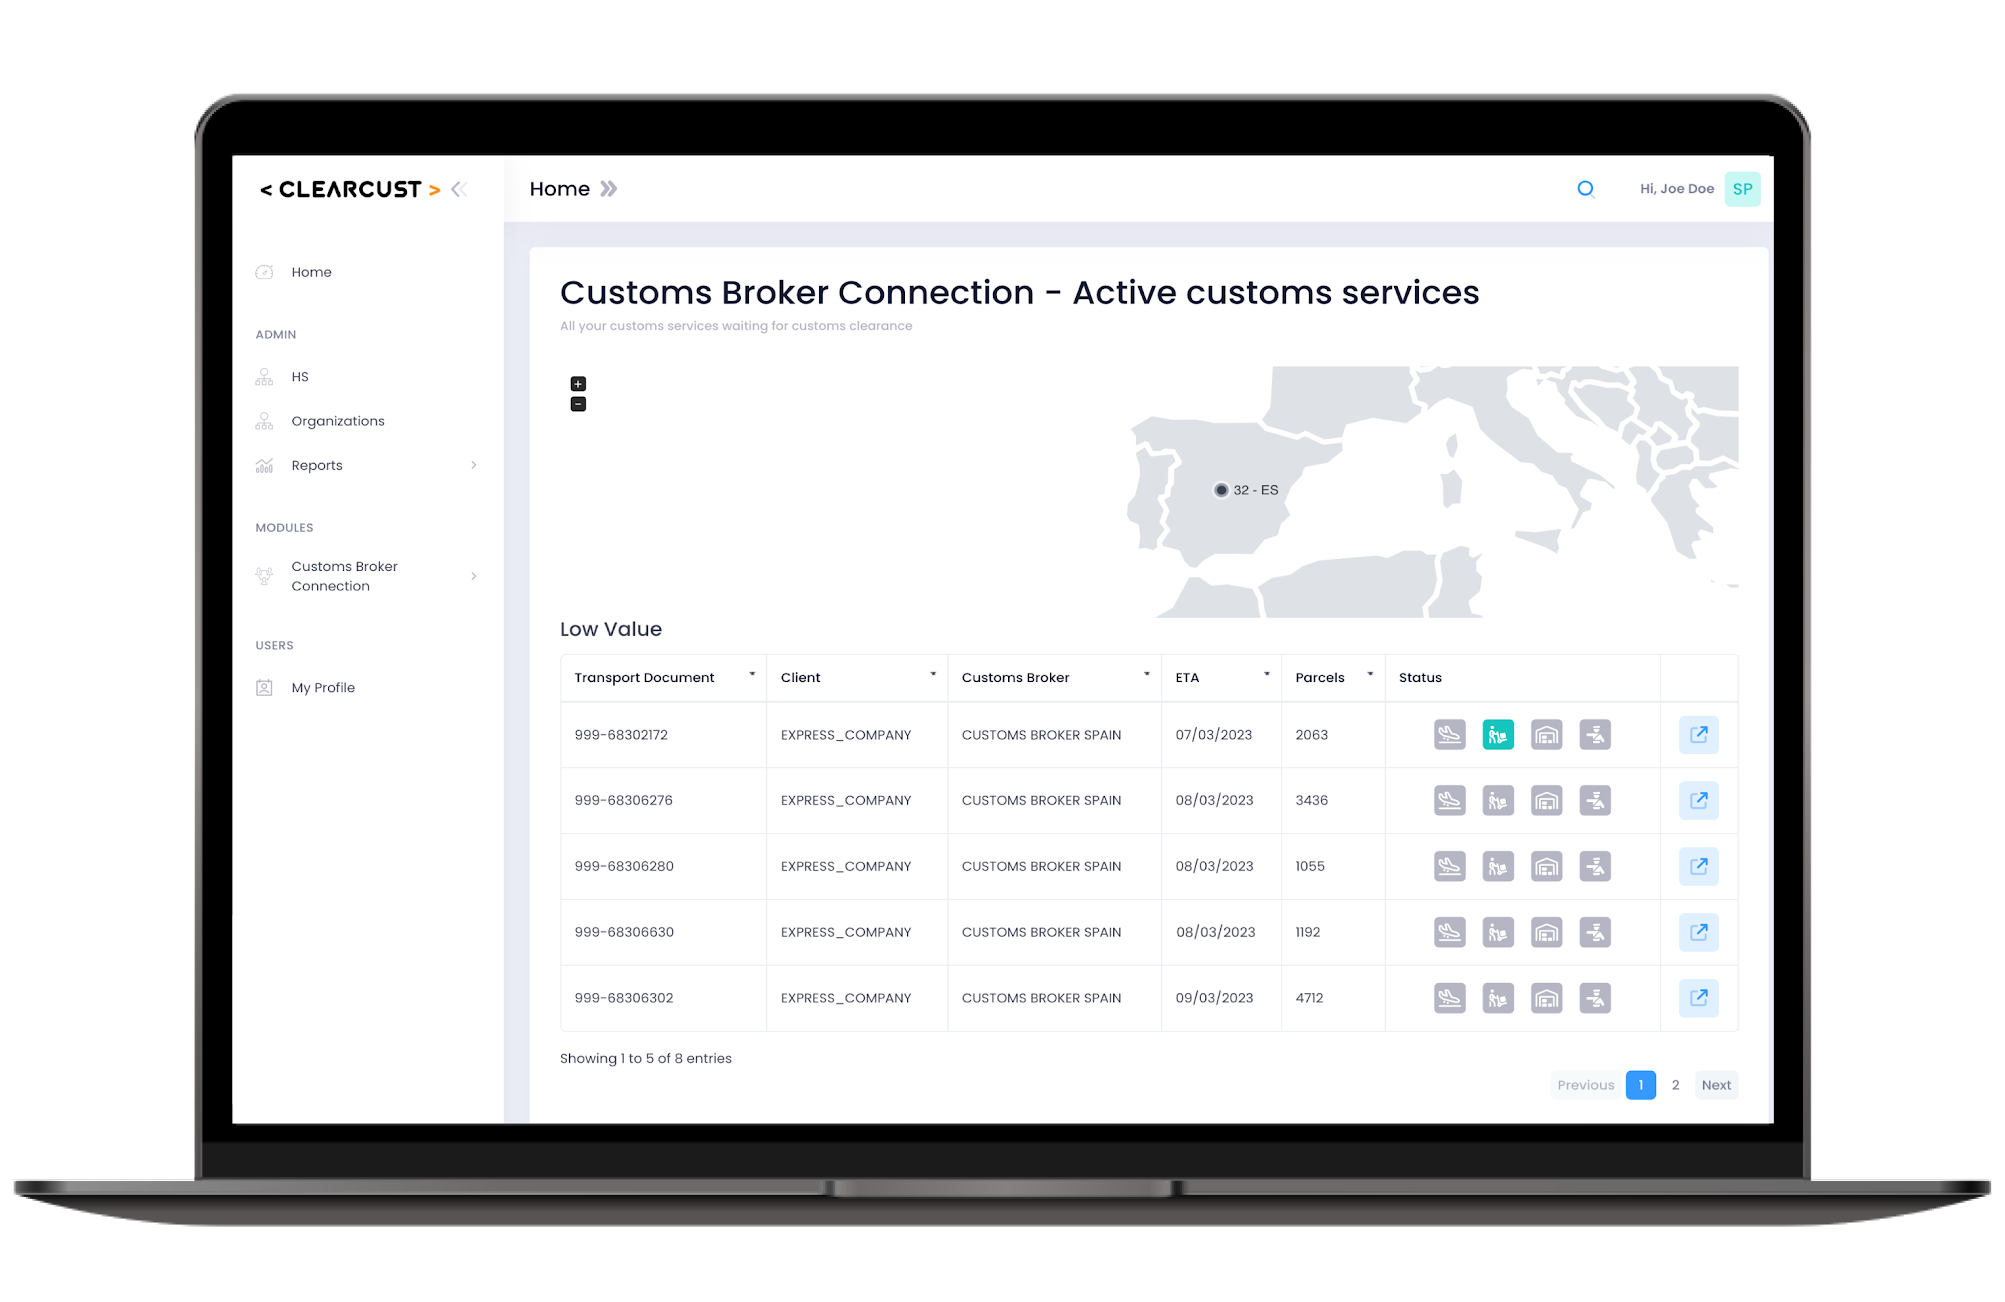 Customs Broker Connection - Clearcust